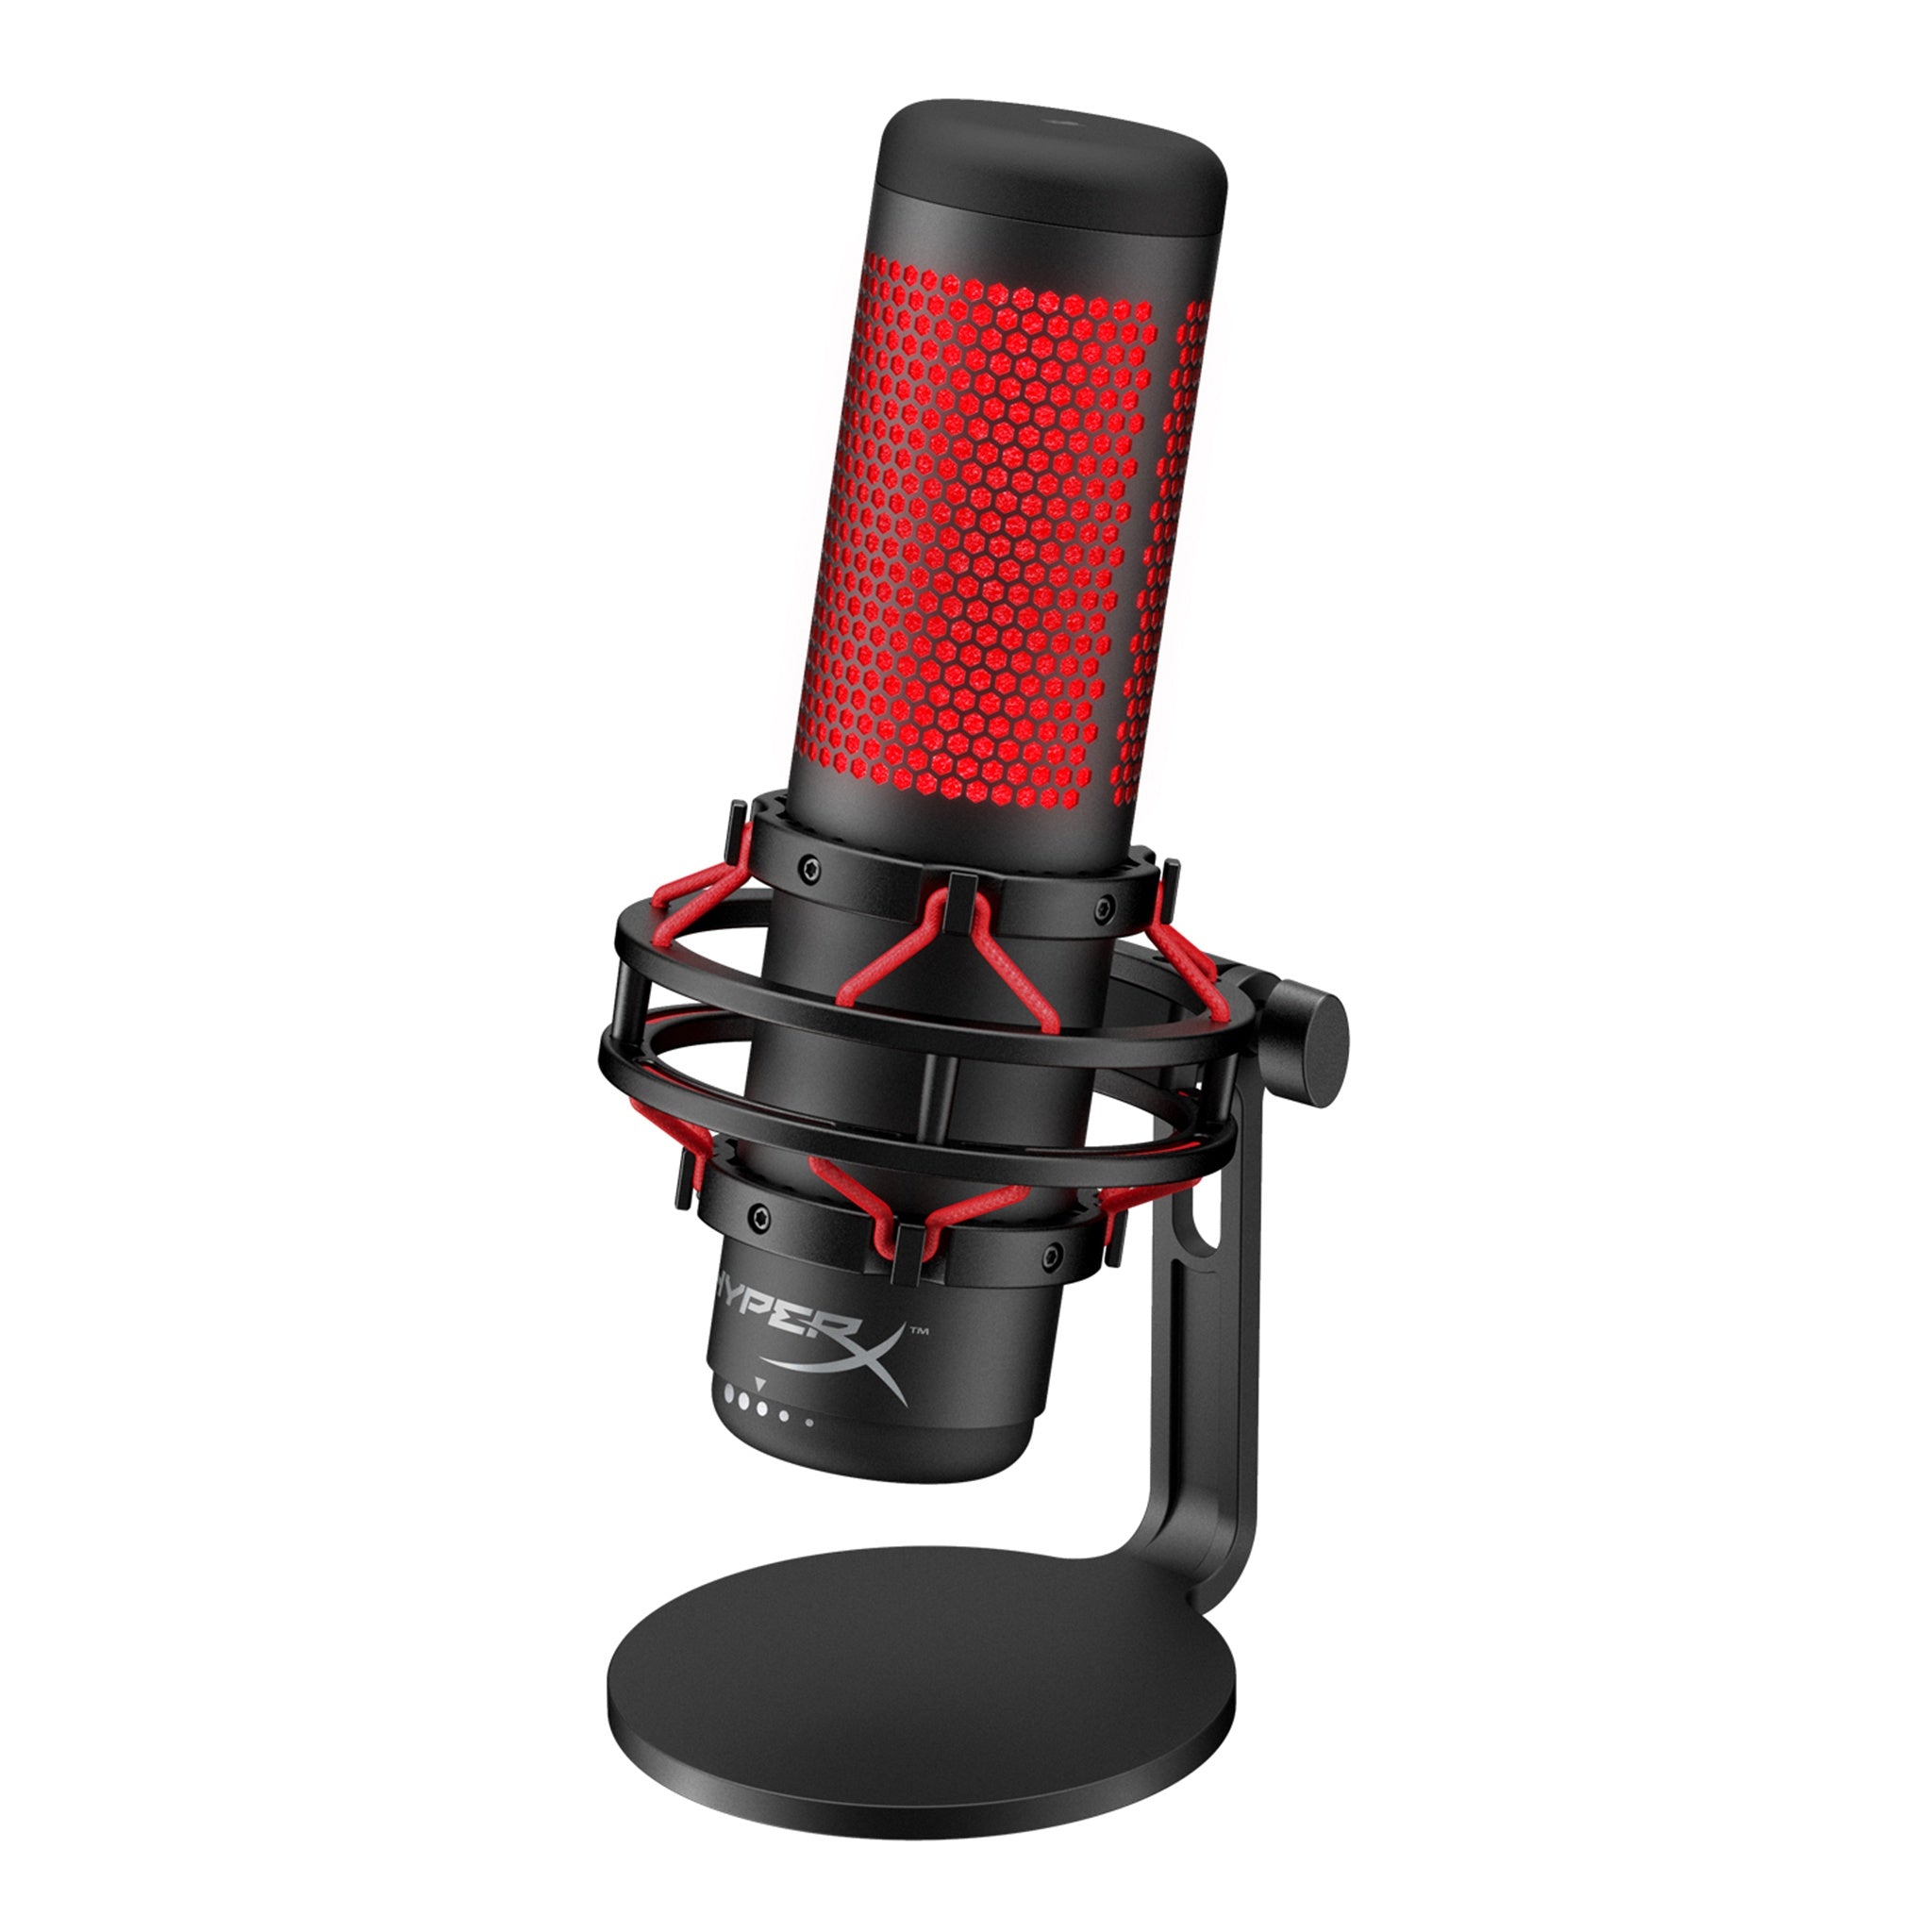 HyperX HX-MICQC-BK QuadCast, USB Condenser Gaming Microphone for PC, PS4  and Mac, Podcasts, Twitch, YouTube, Discord, Red LED - Black